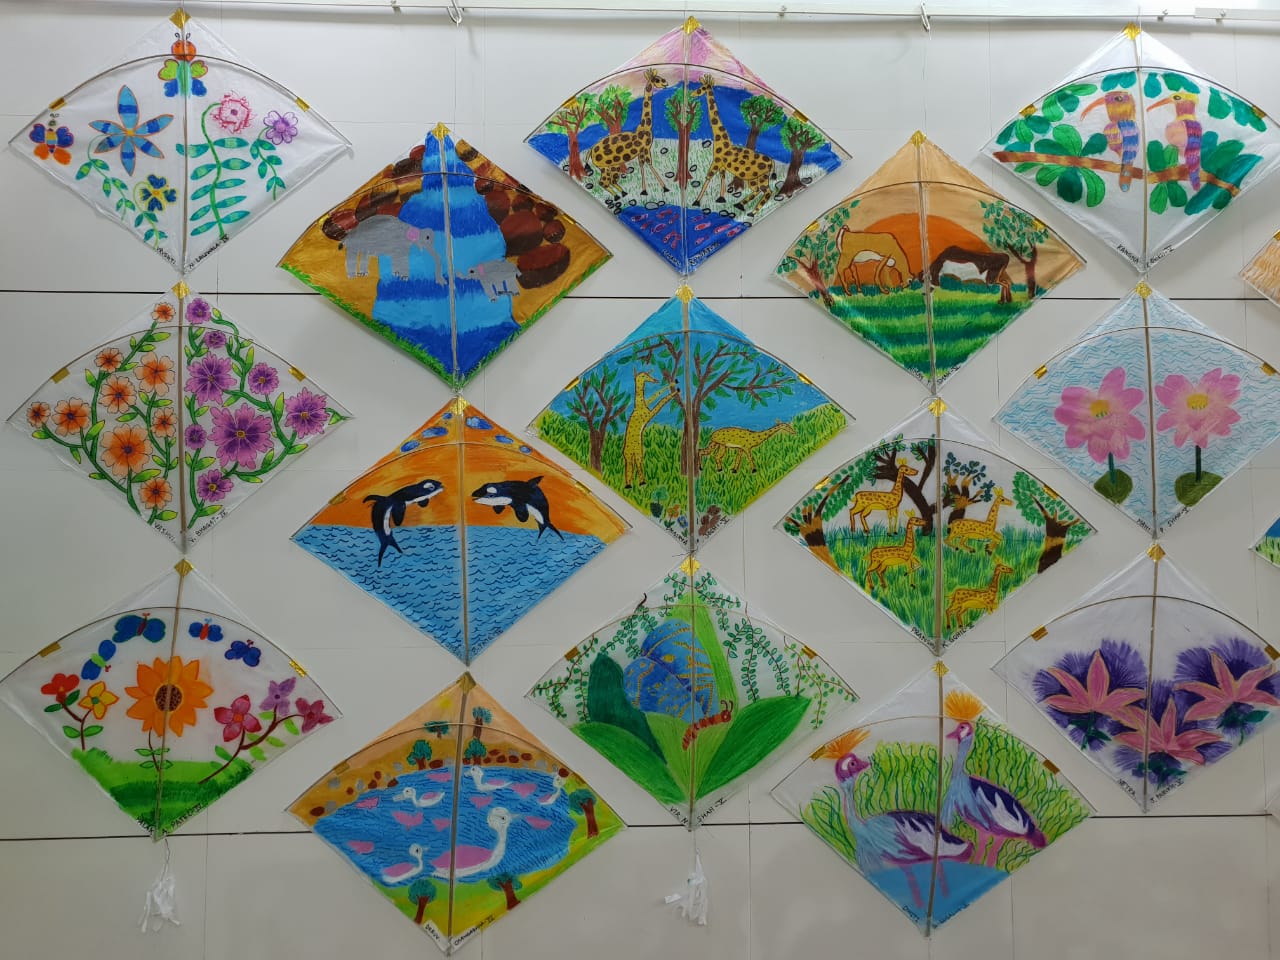 Students draw images related to nature on kites